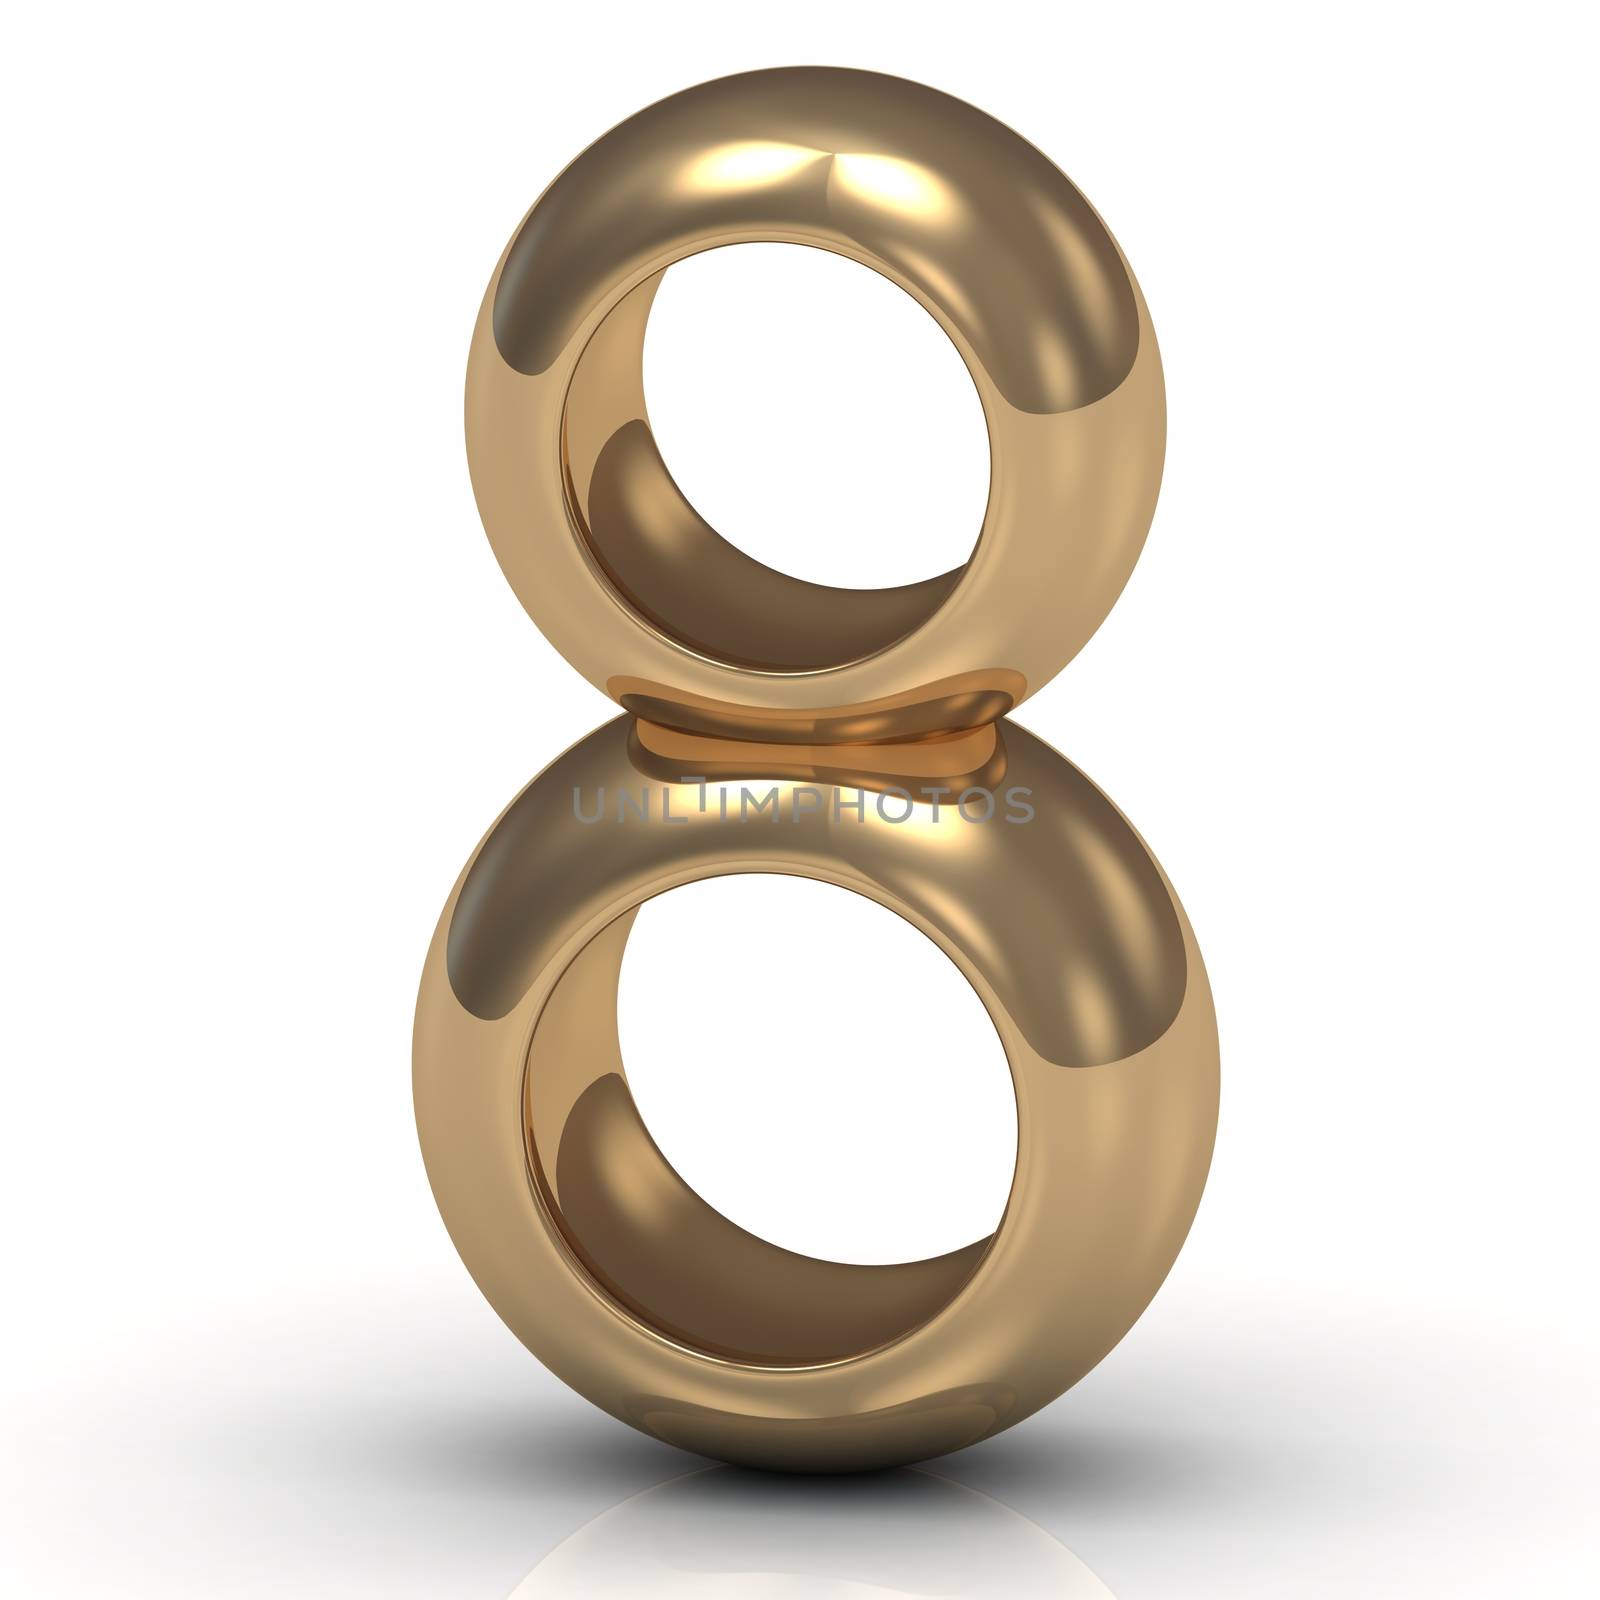 Infinity sign and the figure 8 (International Women's Day) of thick gold rings